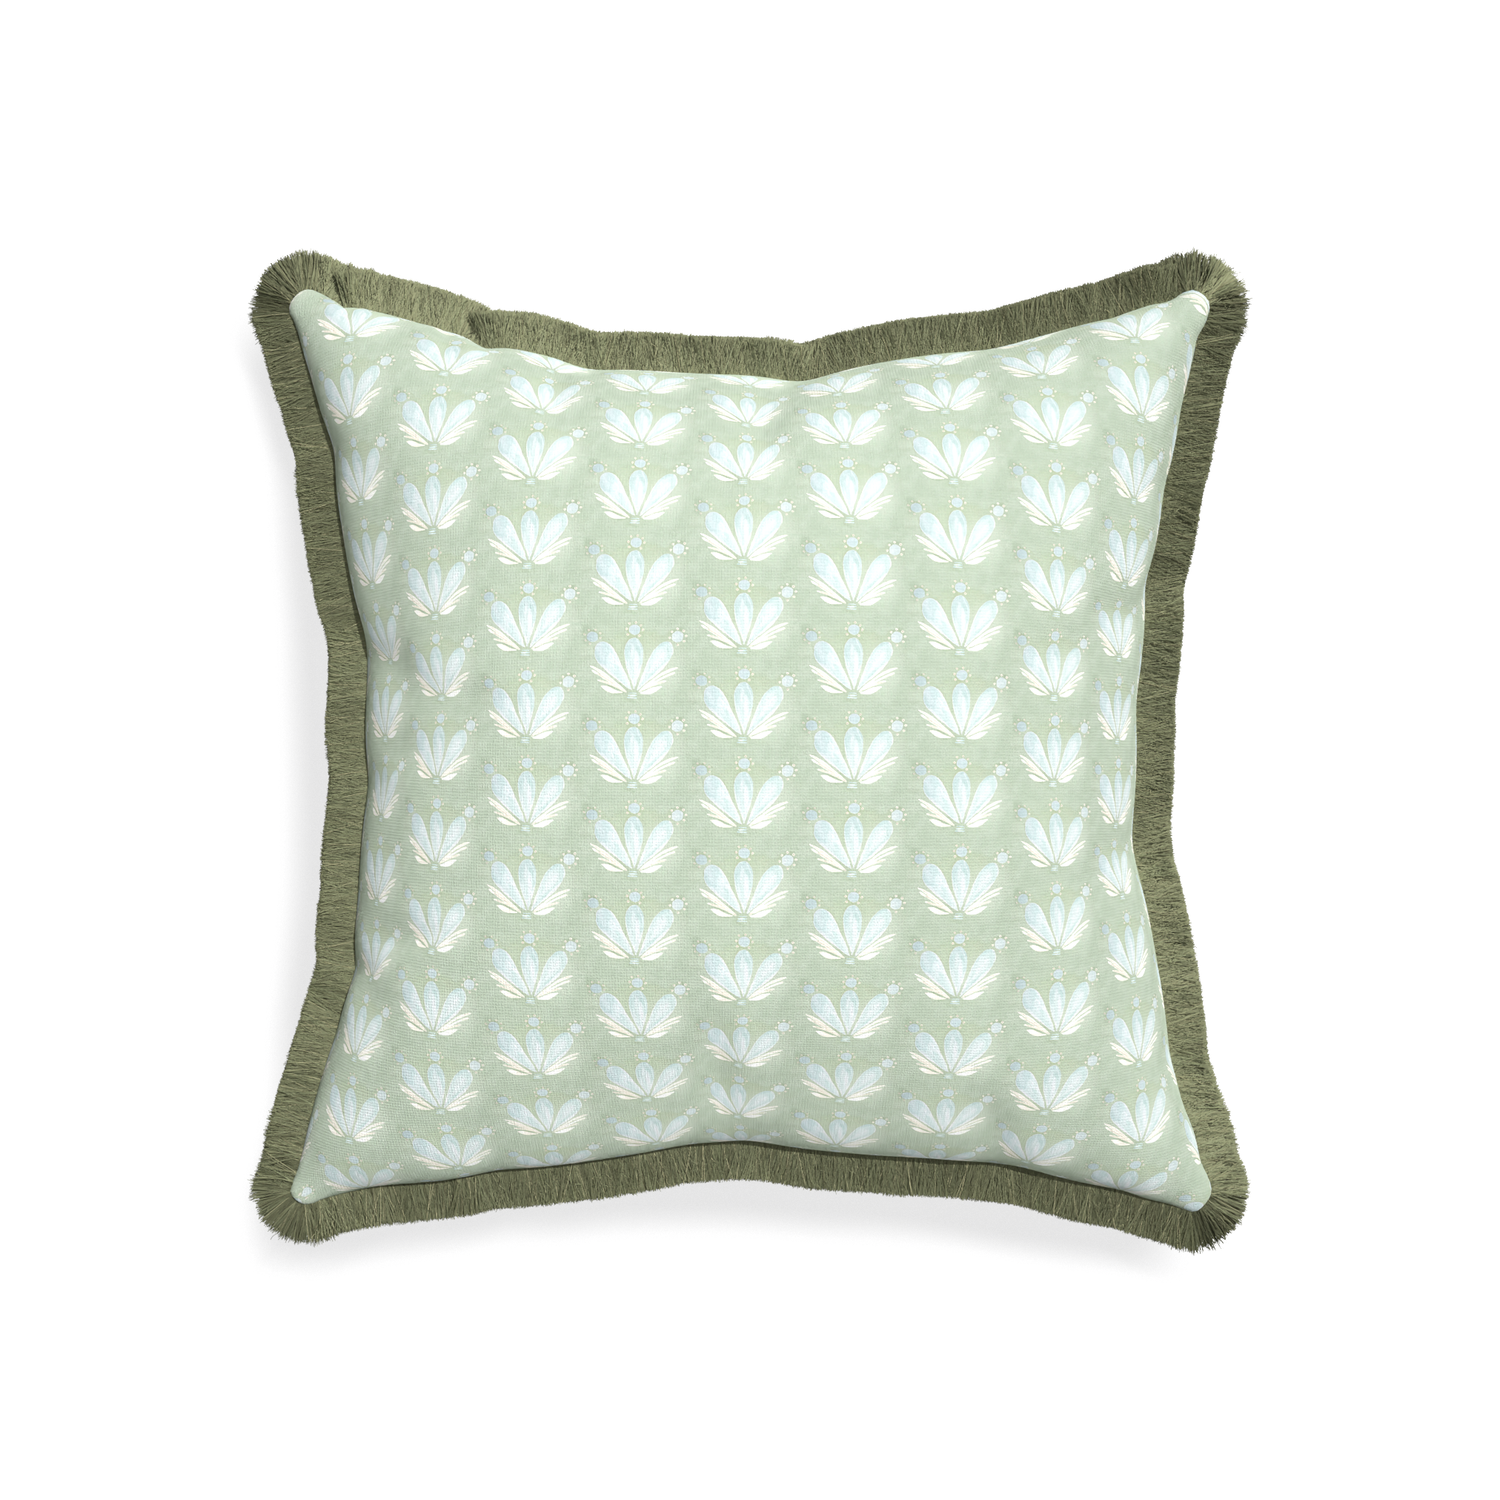 20-square serena sea salt custom blue & green floral drop repeatpillow with sage fringe on white background